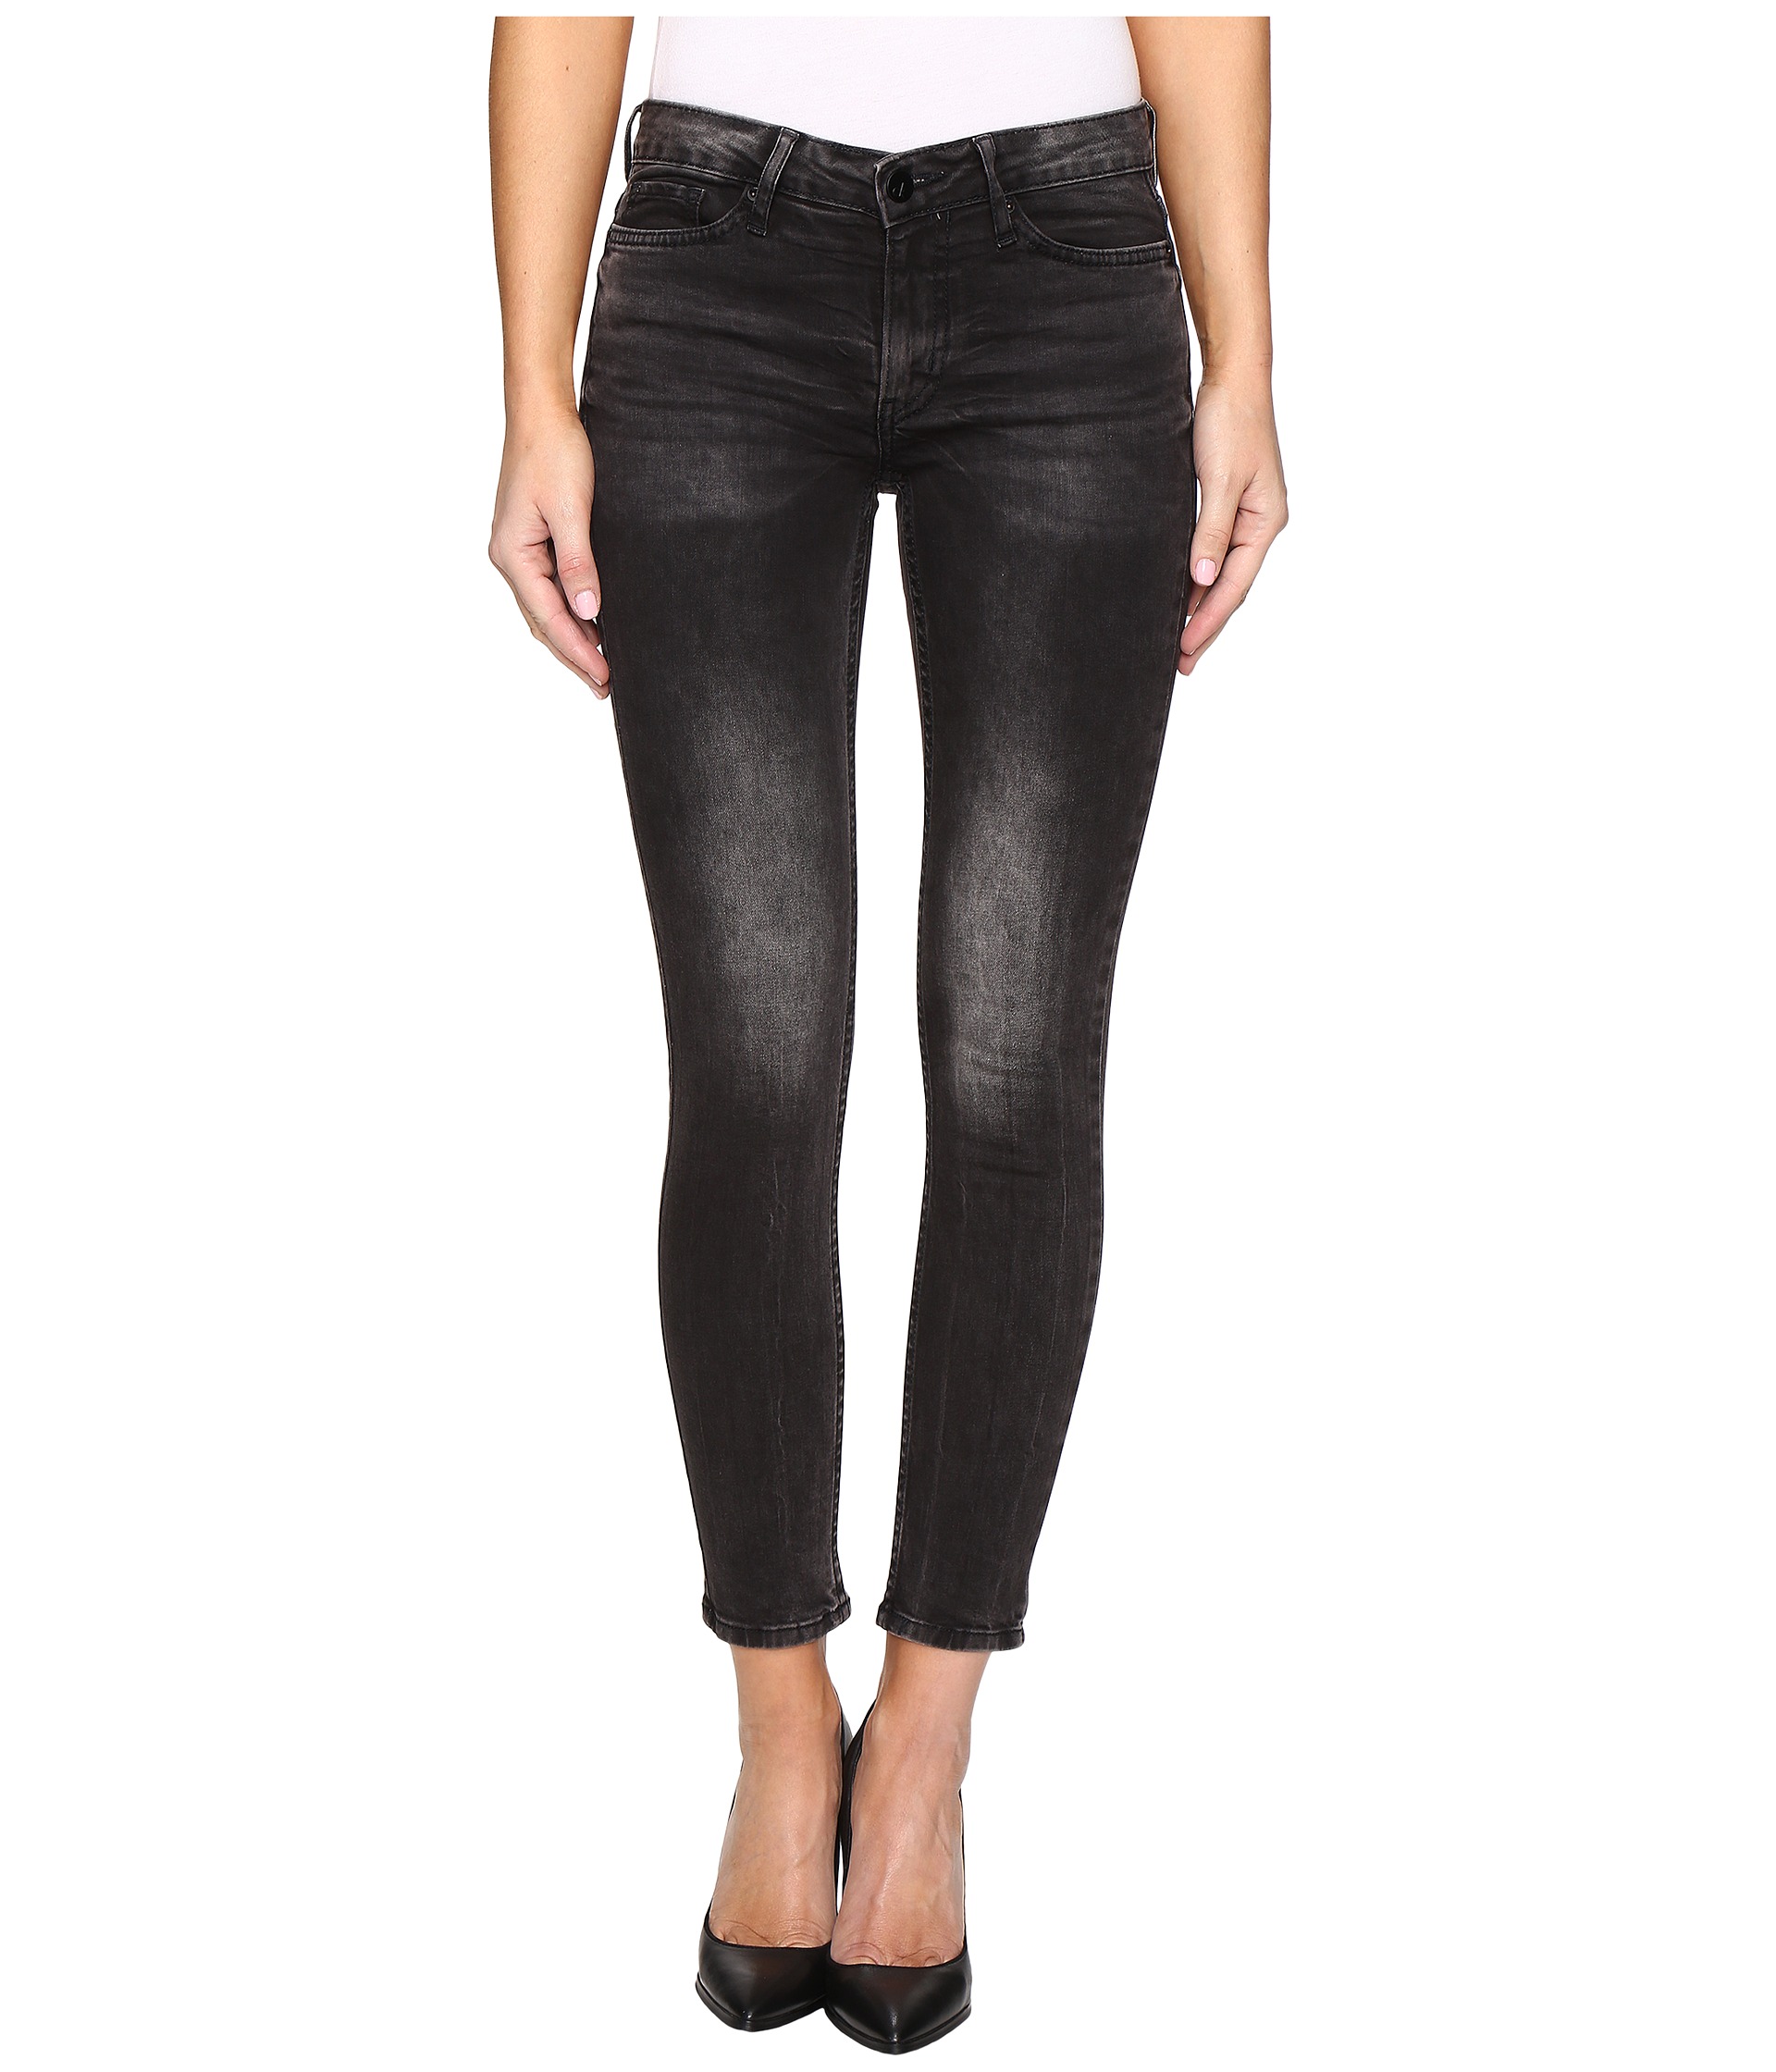 Calvin Klein Jeans Ankle Skinny Jeans in Cement Wash - Zappos.com Free ...